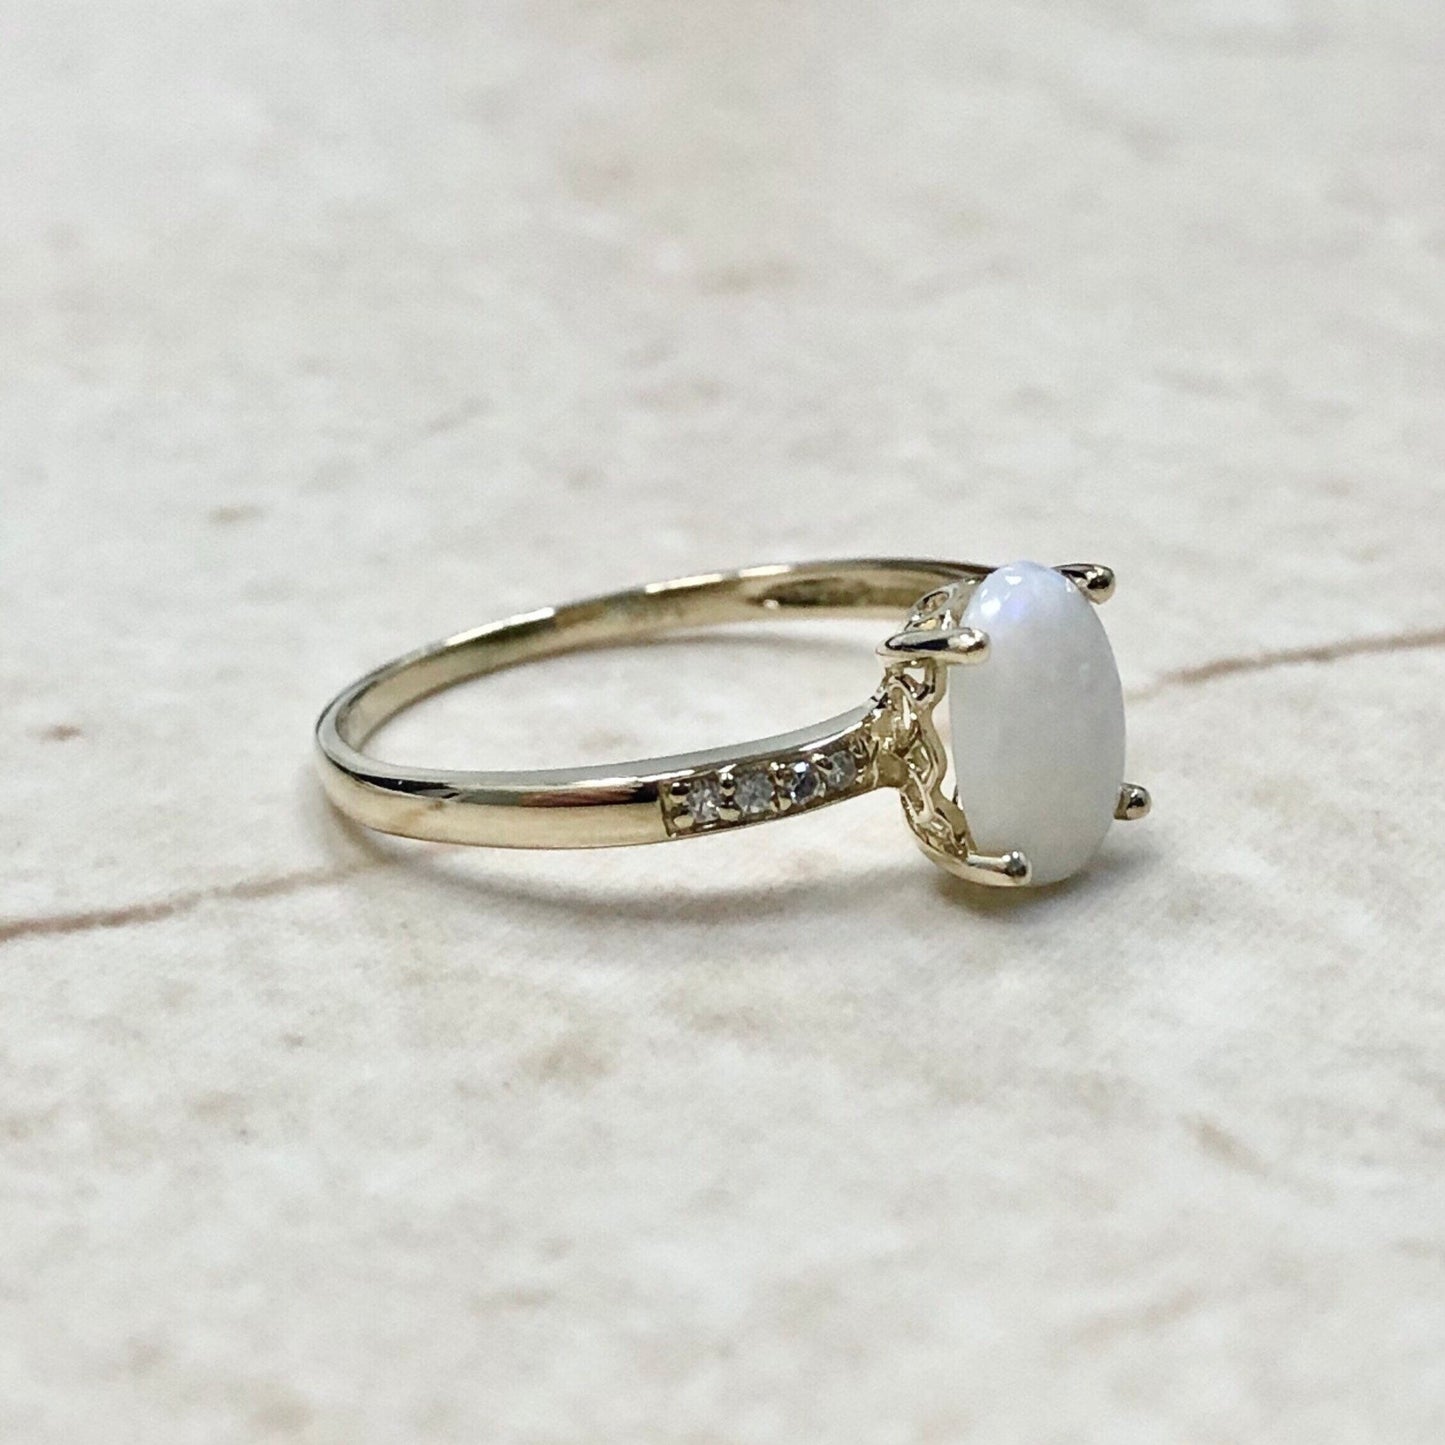 14K Natural Opal & Diamond Ring - Yellow Gold Opal Solitaire Ring - October Birthstone - Birthday Gift - Best Gift For Her - Jewelry Sale